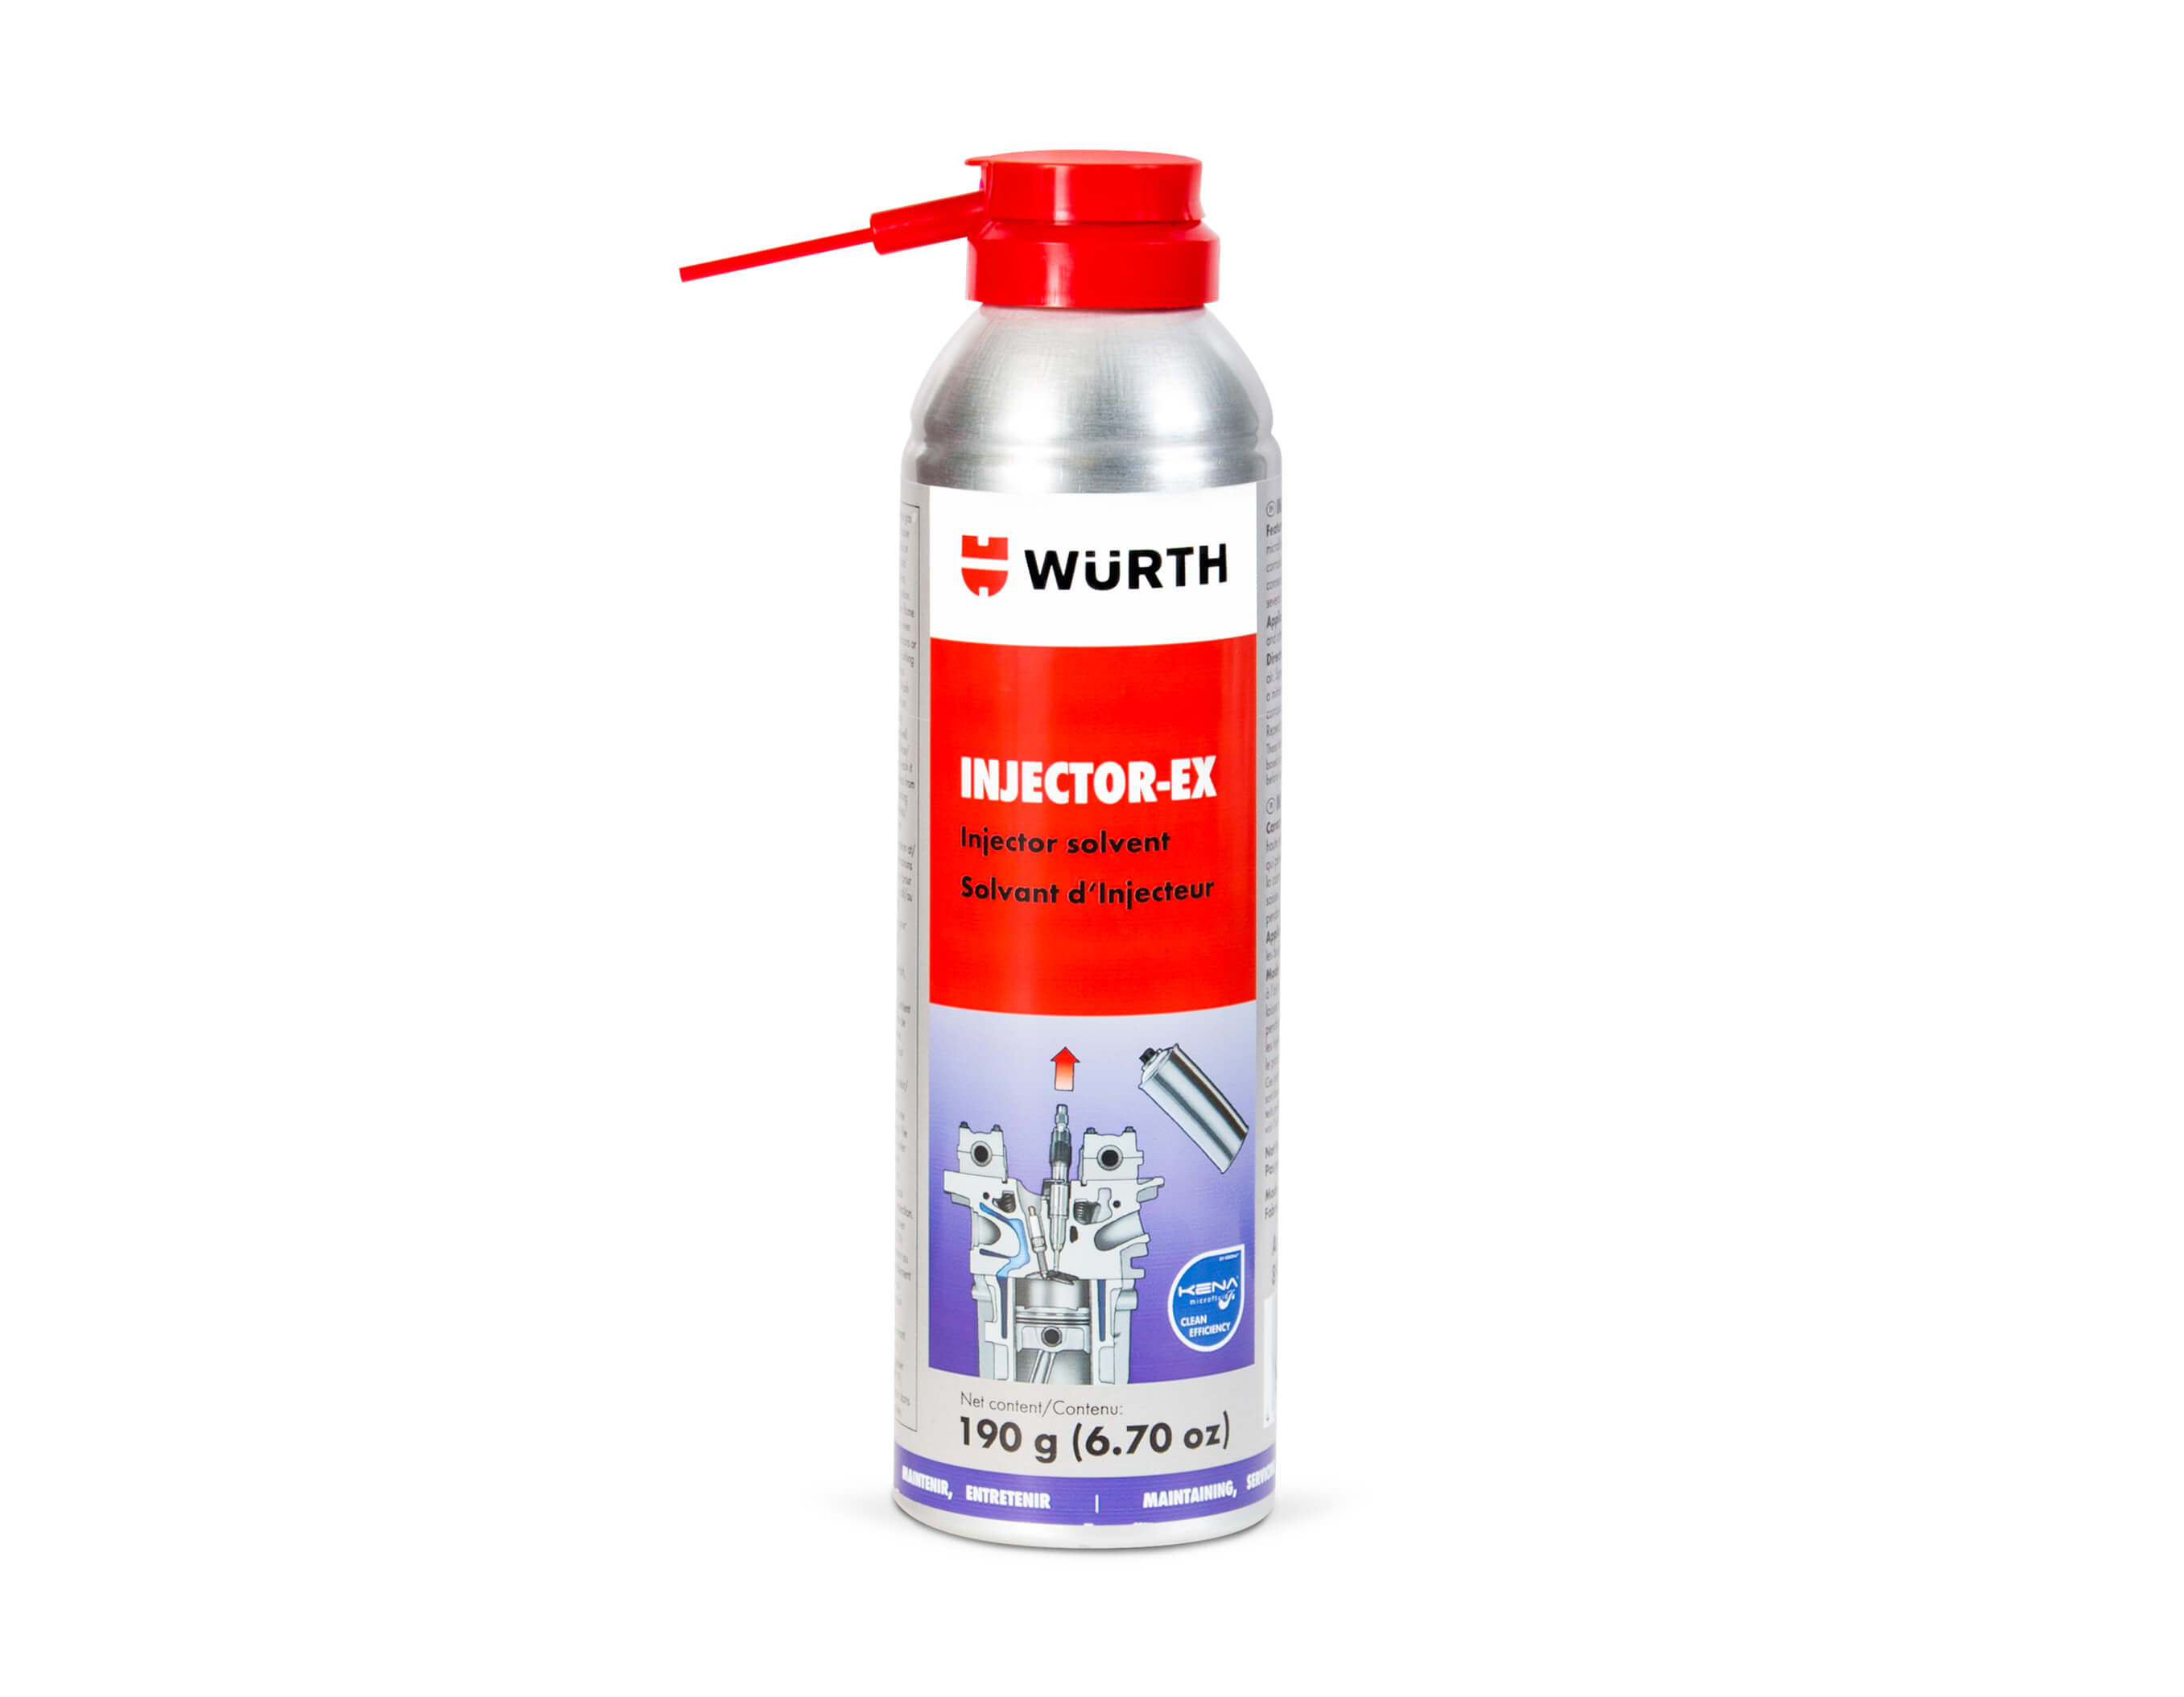 INJECTOR-EX INJECTOR SOLVENT 190 g